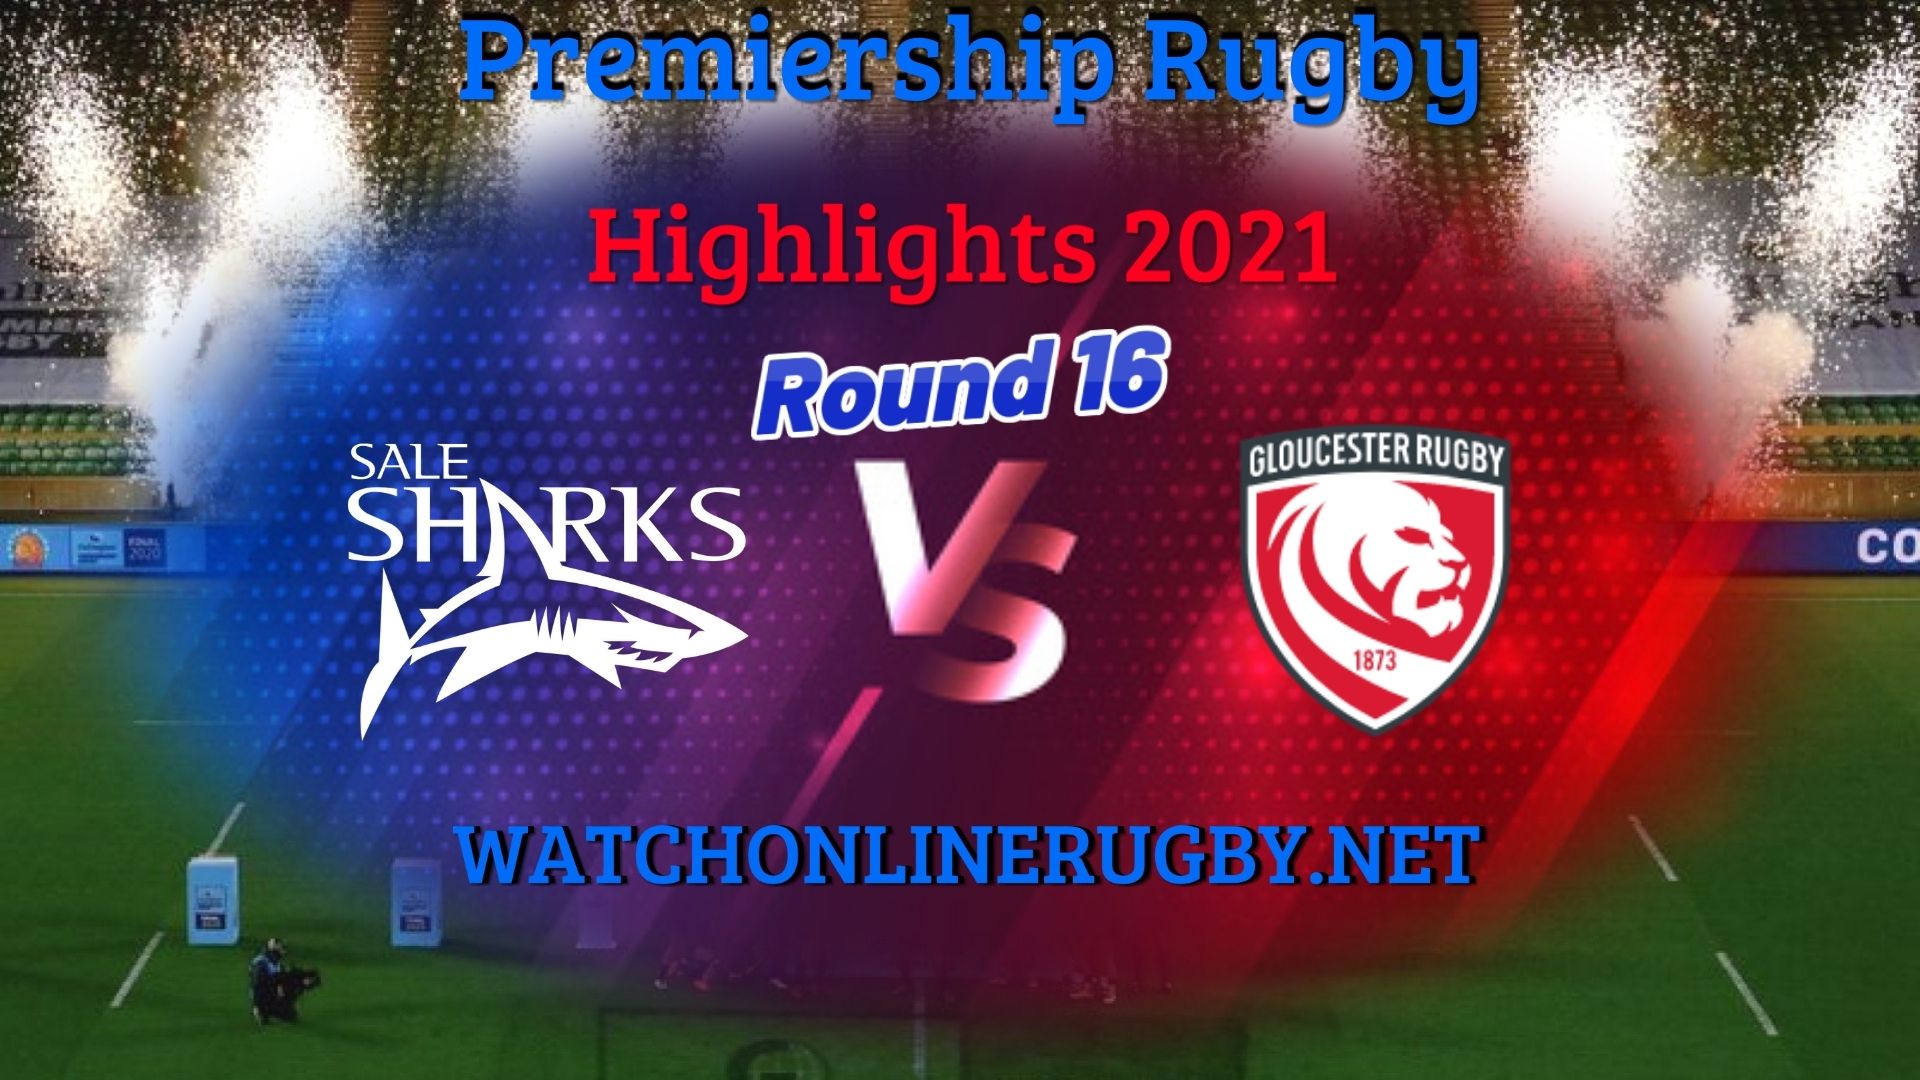 Sale Sharks Vs Gloucester Rugby Premiership Rugby 2021 RD 16